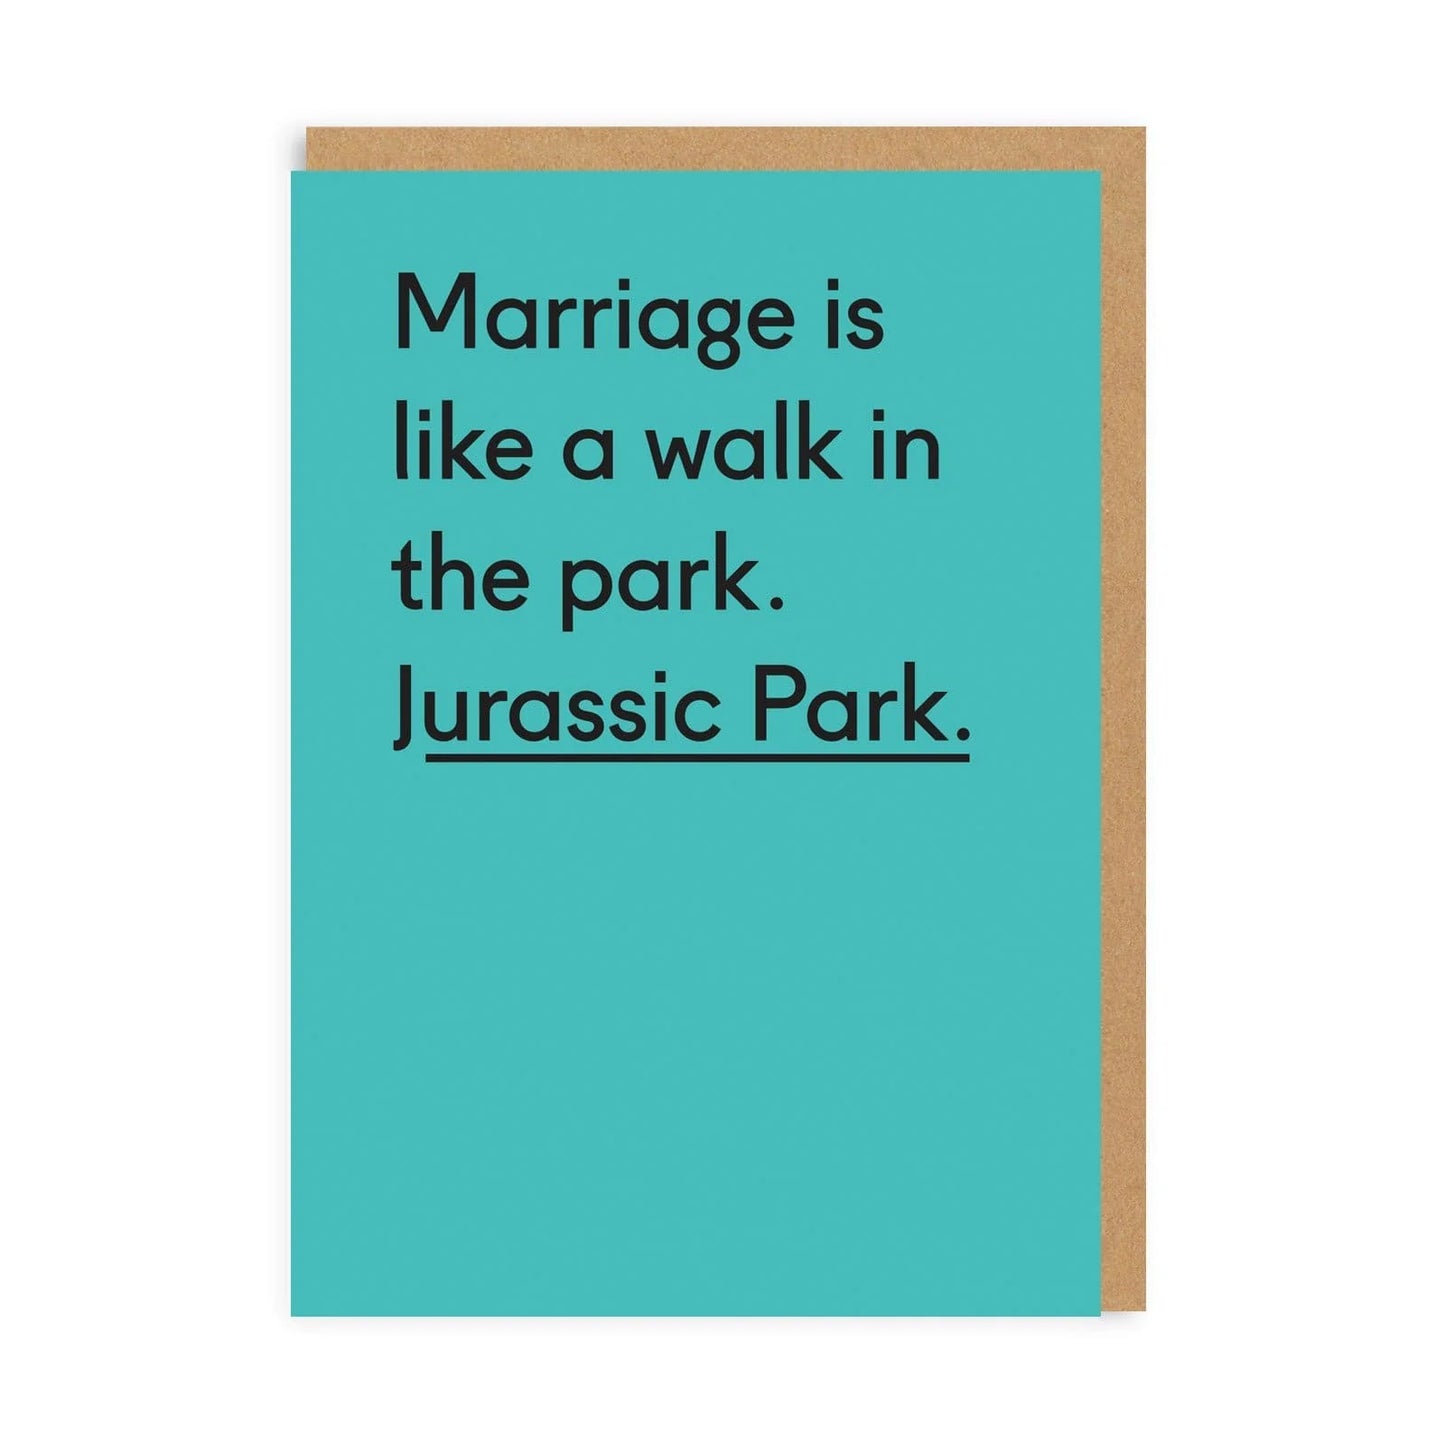 Marriage is Like a Walk in the Park. Jurassic Park.